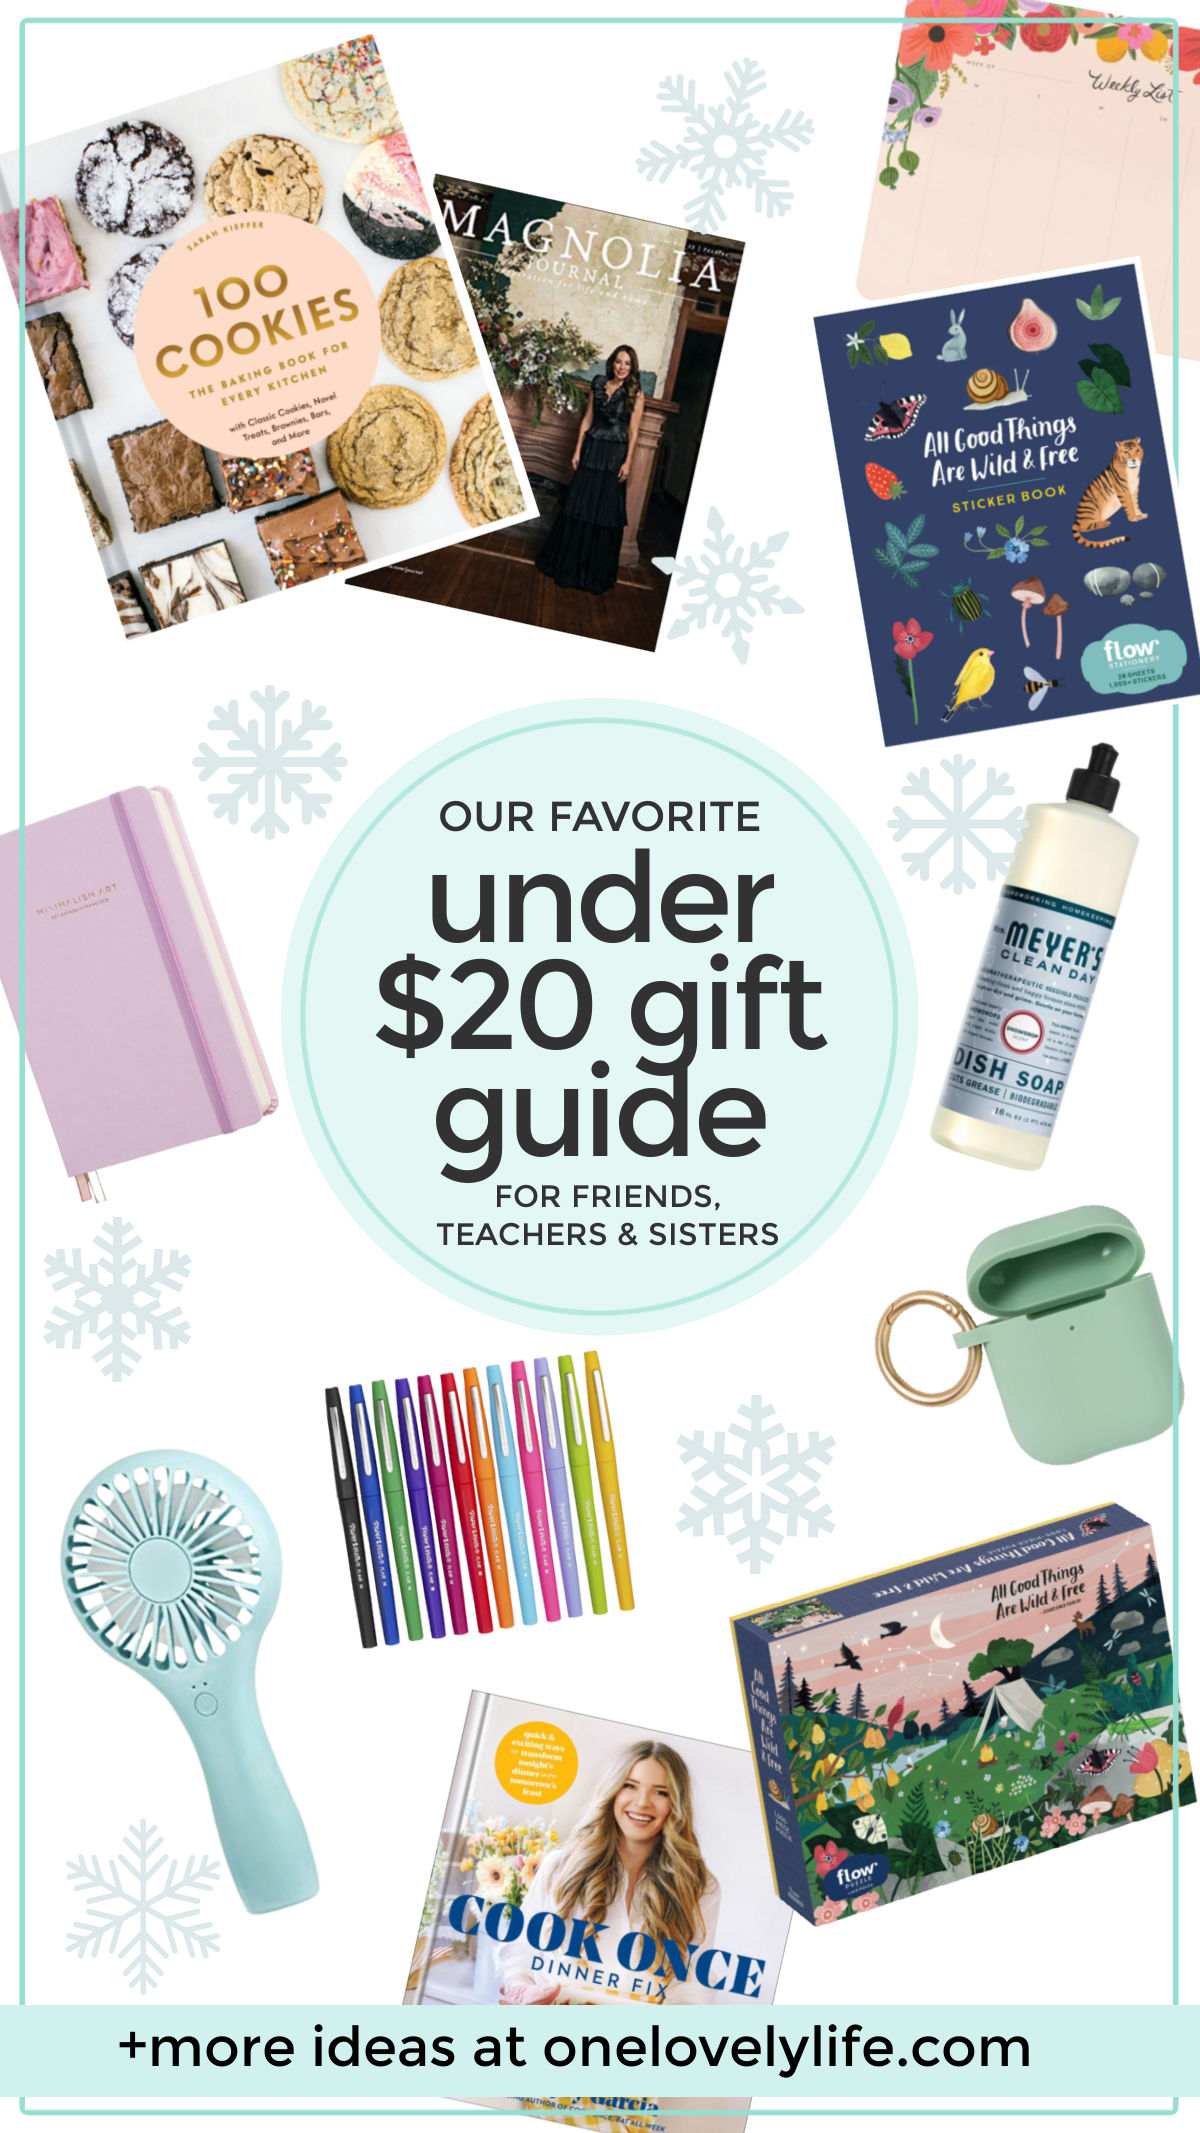 The Under $20 Gift Guide is HERE! - Great gifts can be found on a budget! I've rounded up 40+ AWESOME gifts ideas for $20 or less. They're perfect for friends, sisters, moms, in-laws, teachers, and YOU! // Budget gift ideas // teacher gift ideas // friend gift ideas // sister gift ideas // mother in law gifts // mom gifts // gifts for mom // gifts for in-laws // gifts for teachers // gifts for friends // gifts for sisters #giftguide #giftideas #holidaygifts #budgetgifts